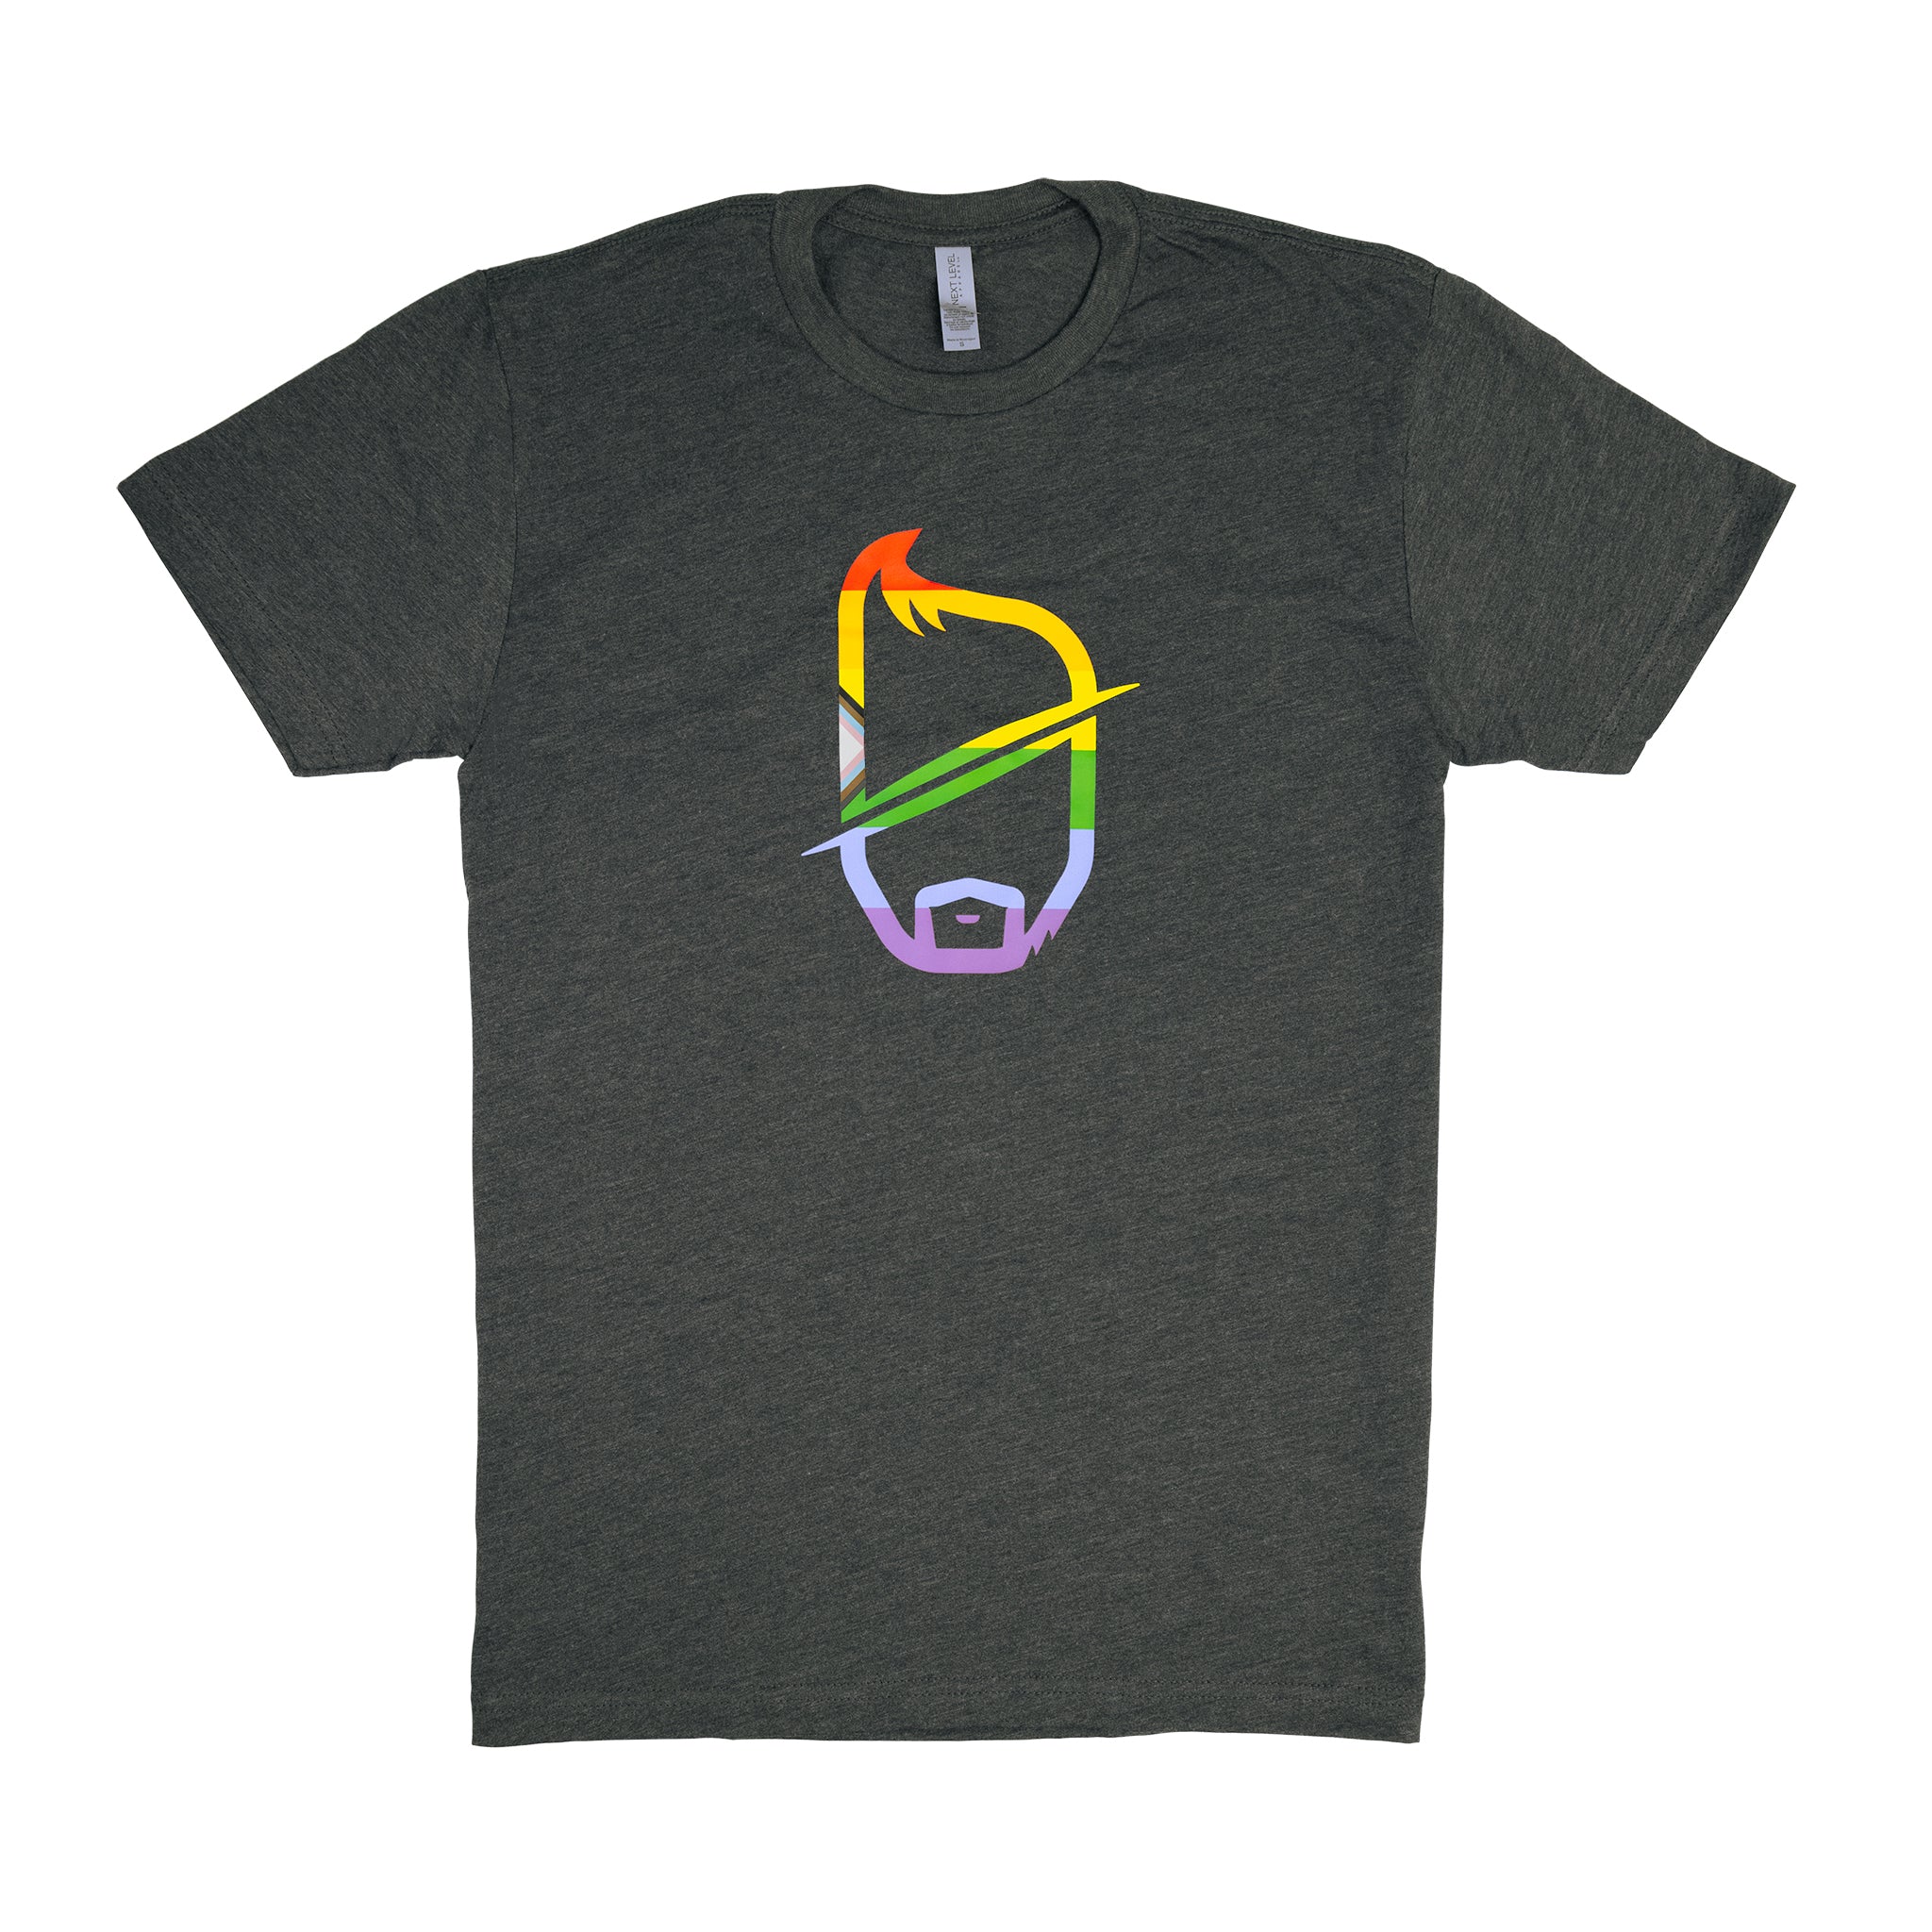 Super Carlin Brothers Celebrate Yourself Gray Shirt with Rainbow SCB Logo